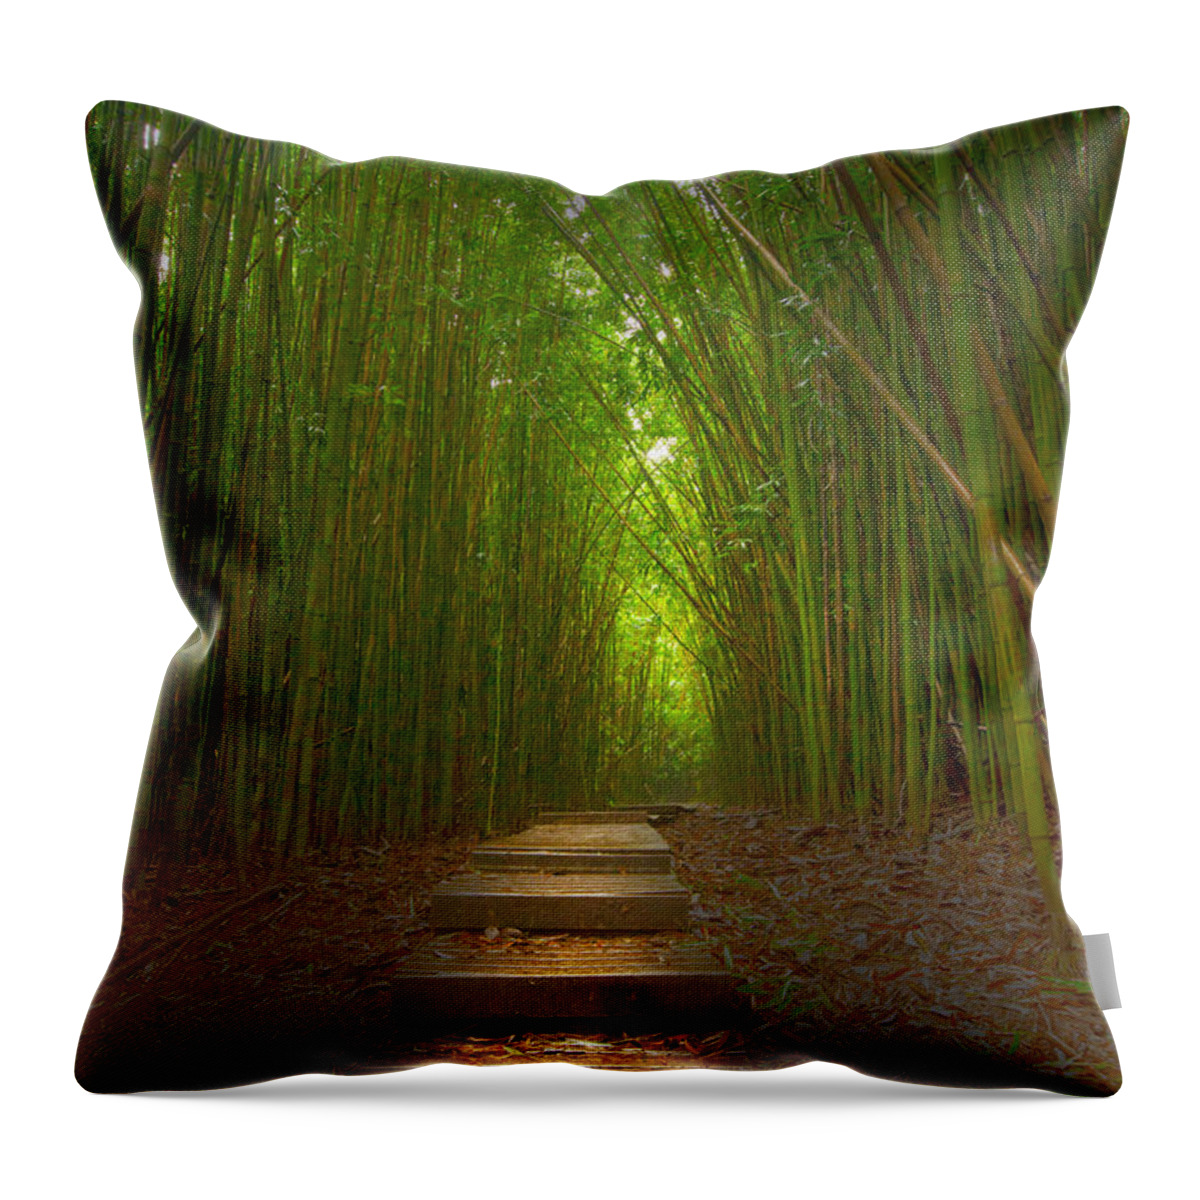 Hana Maui Hawaii Bamboo Forest Tropical Throw Pillow featuring the photograph A Path Less Traveled by James Roemmling